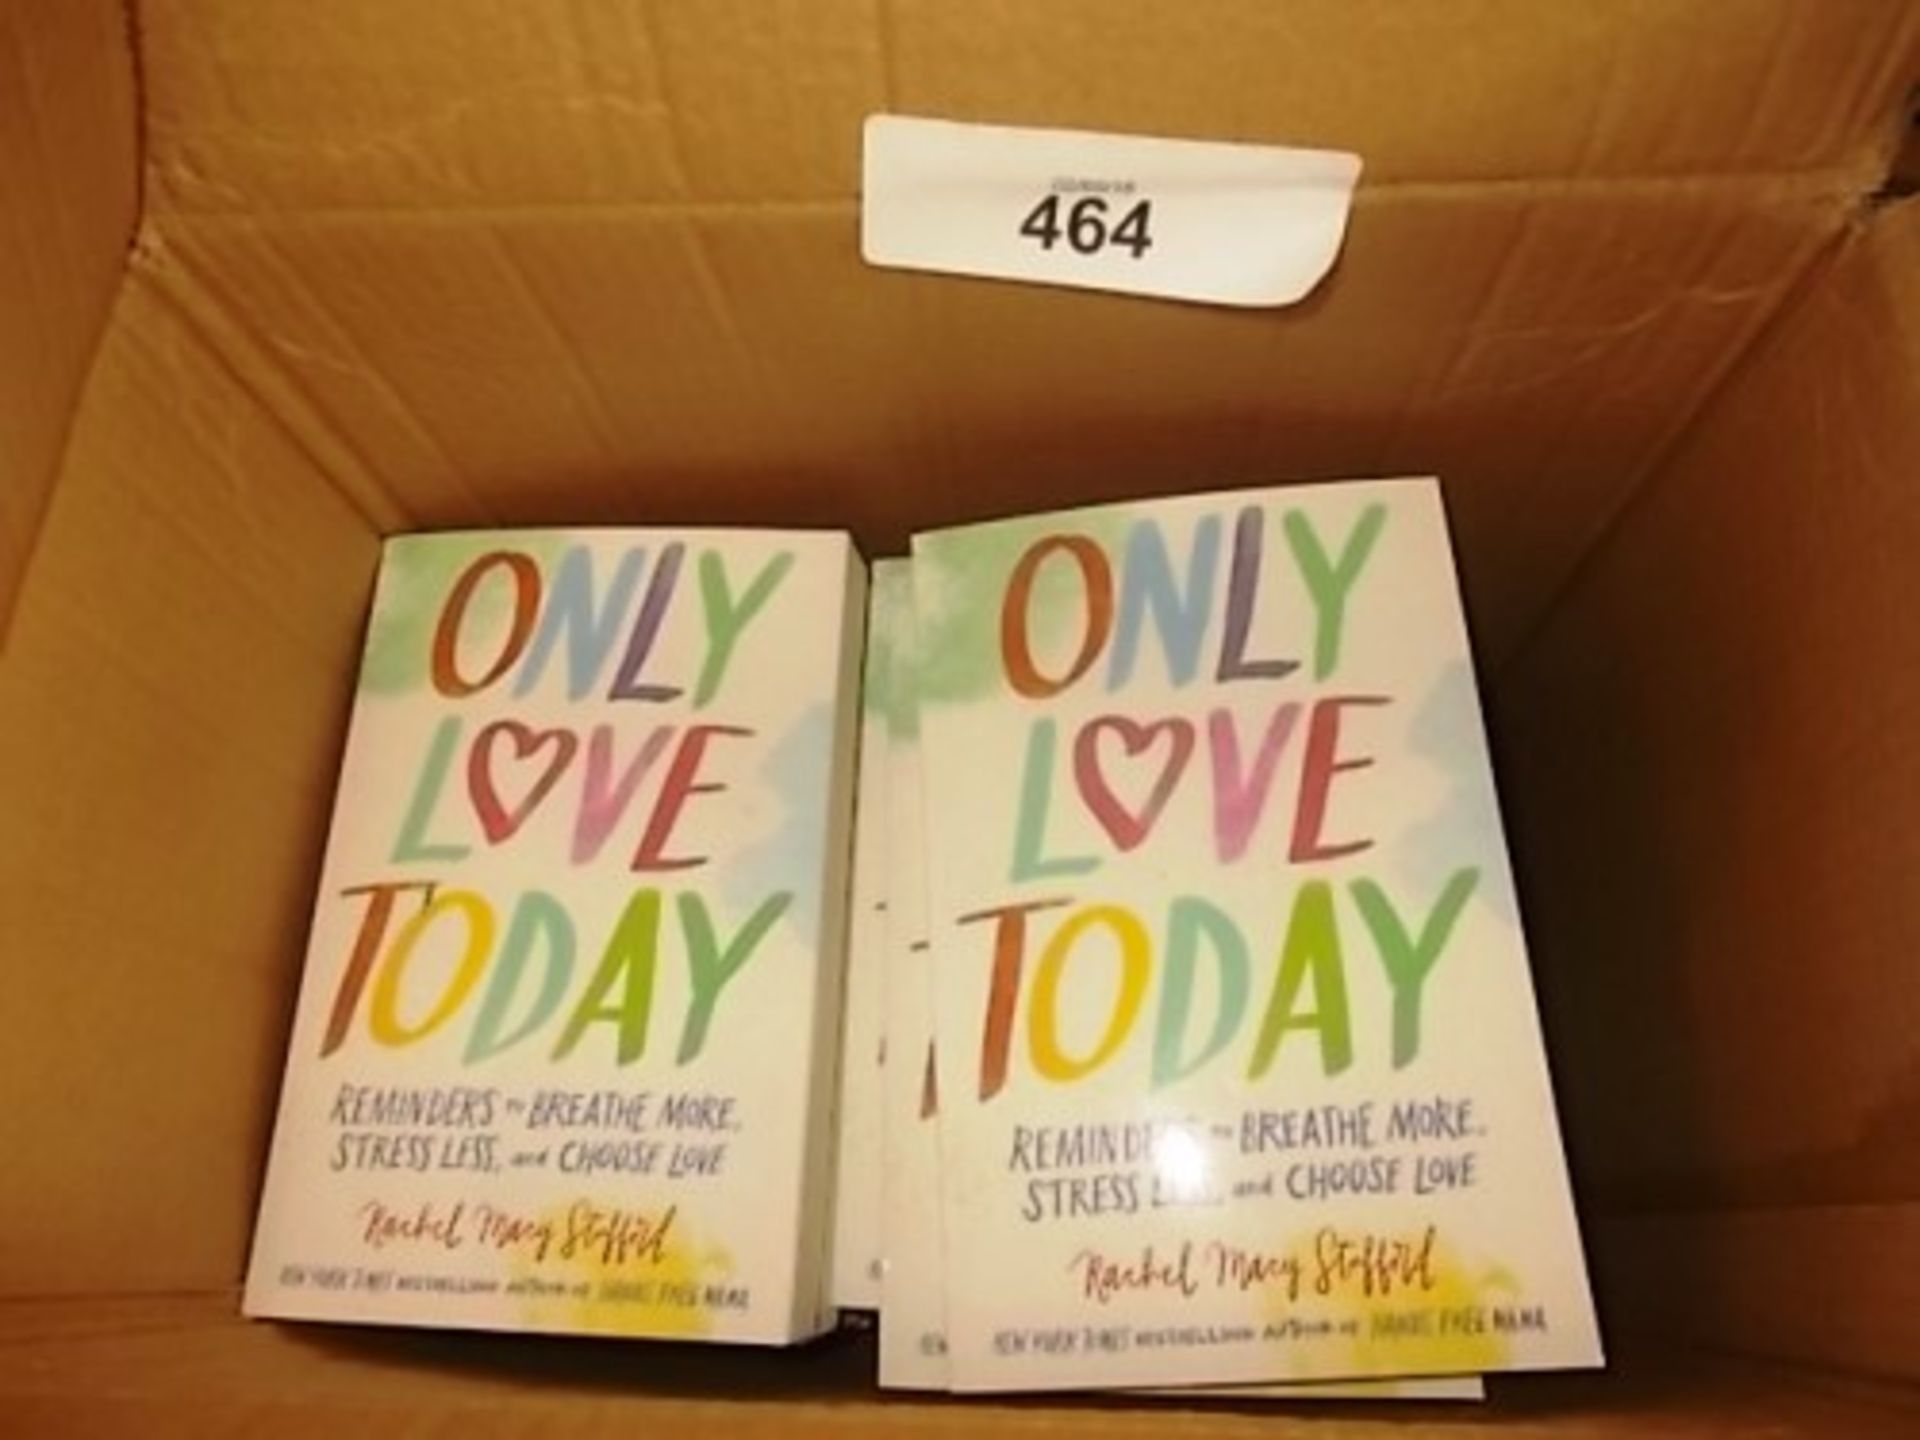 17 x Only Love Today by Rachel May Stafford - Second-hand